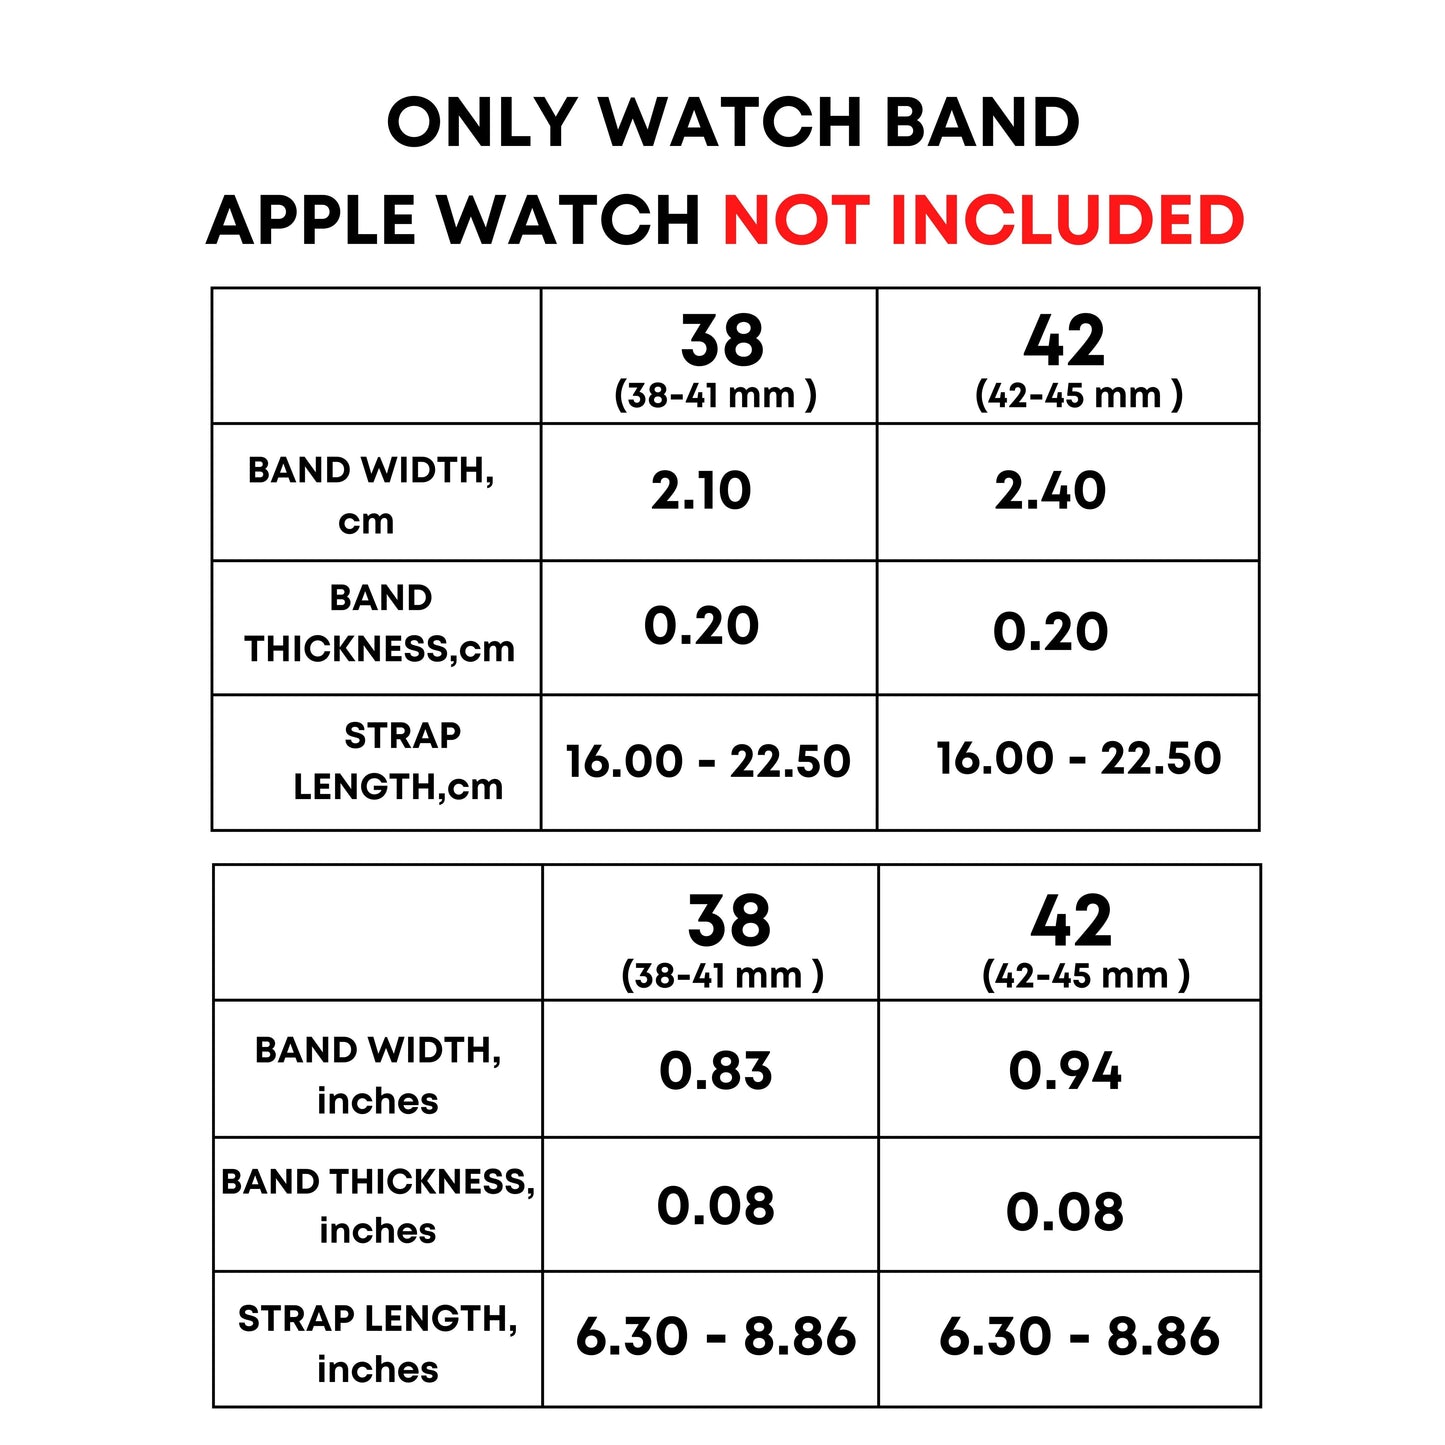 swingers apple watch band, plays well with others, measurements